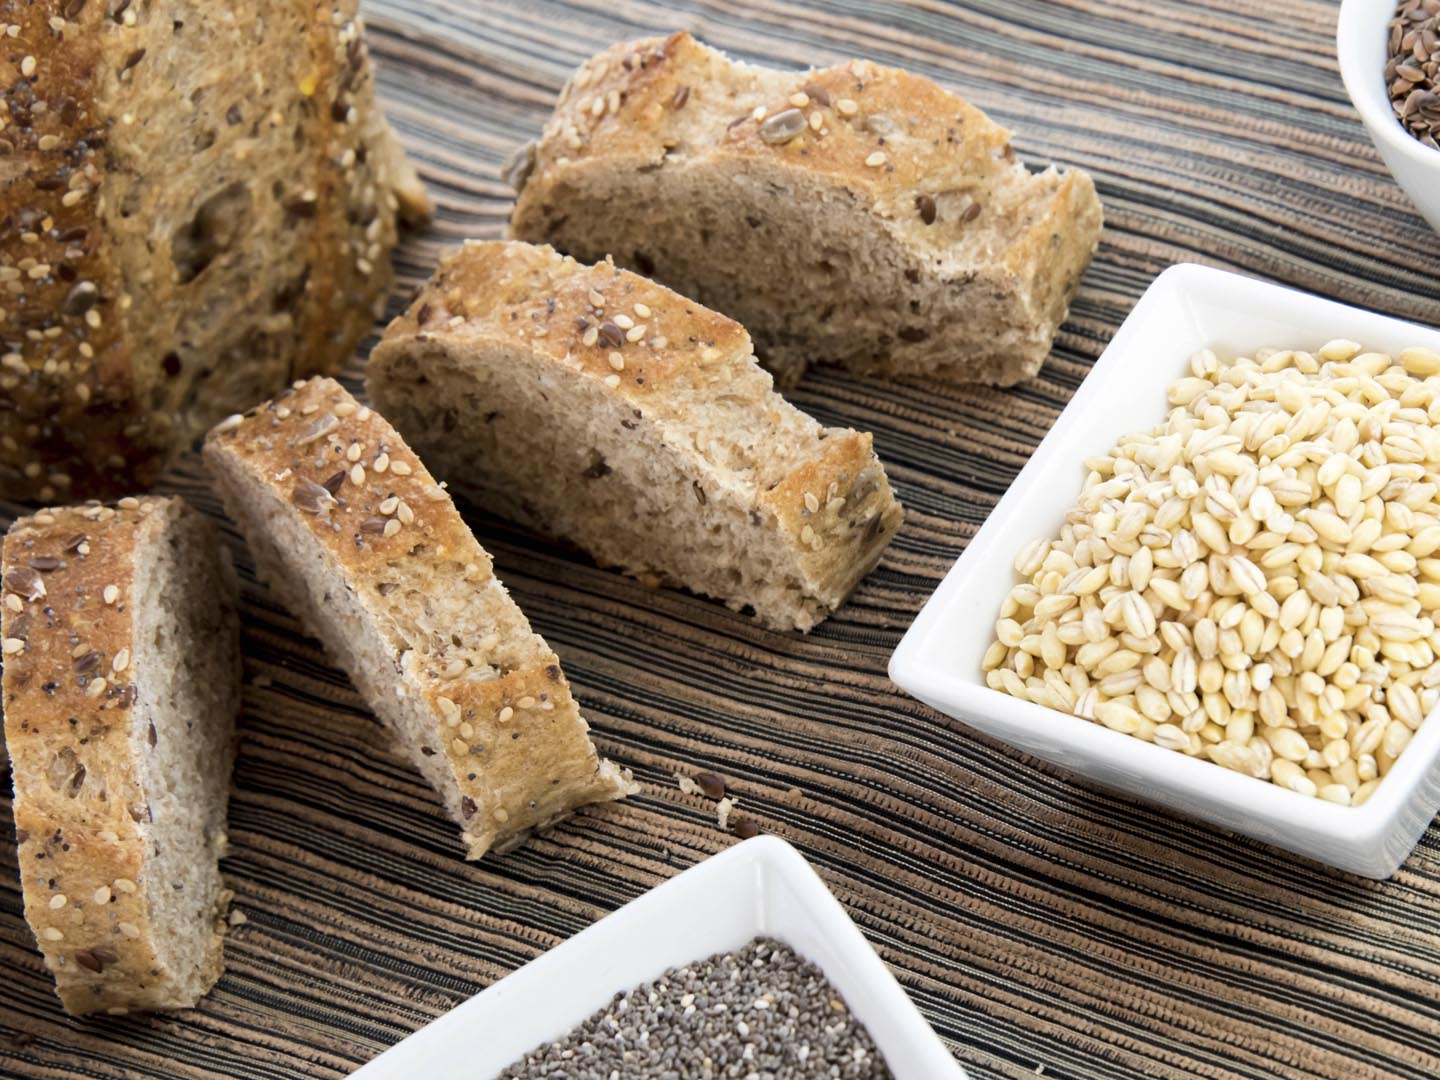 a fresh baked loaf of whole grains bread with poppy, flax adn sunflower seeds